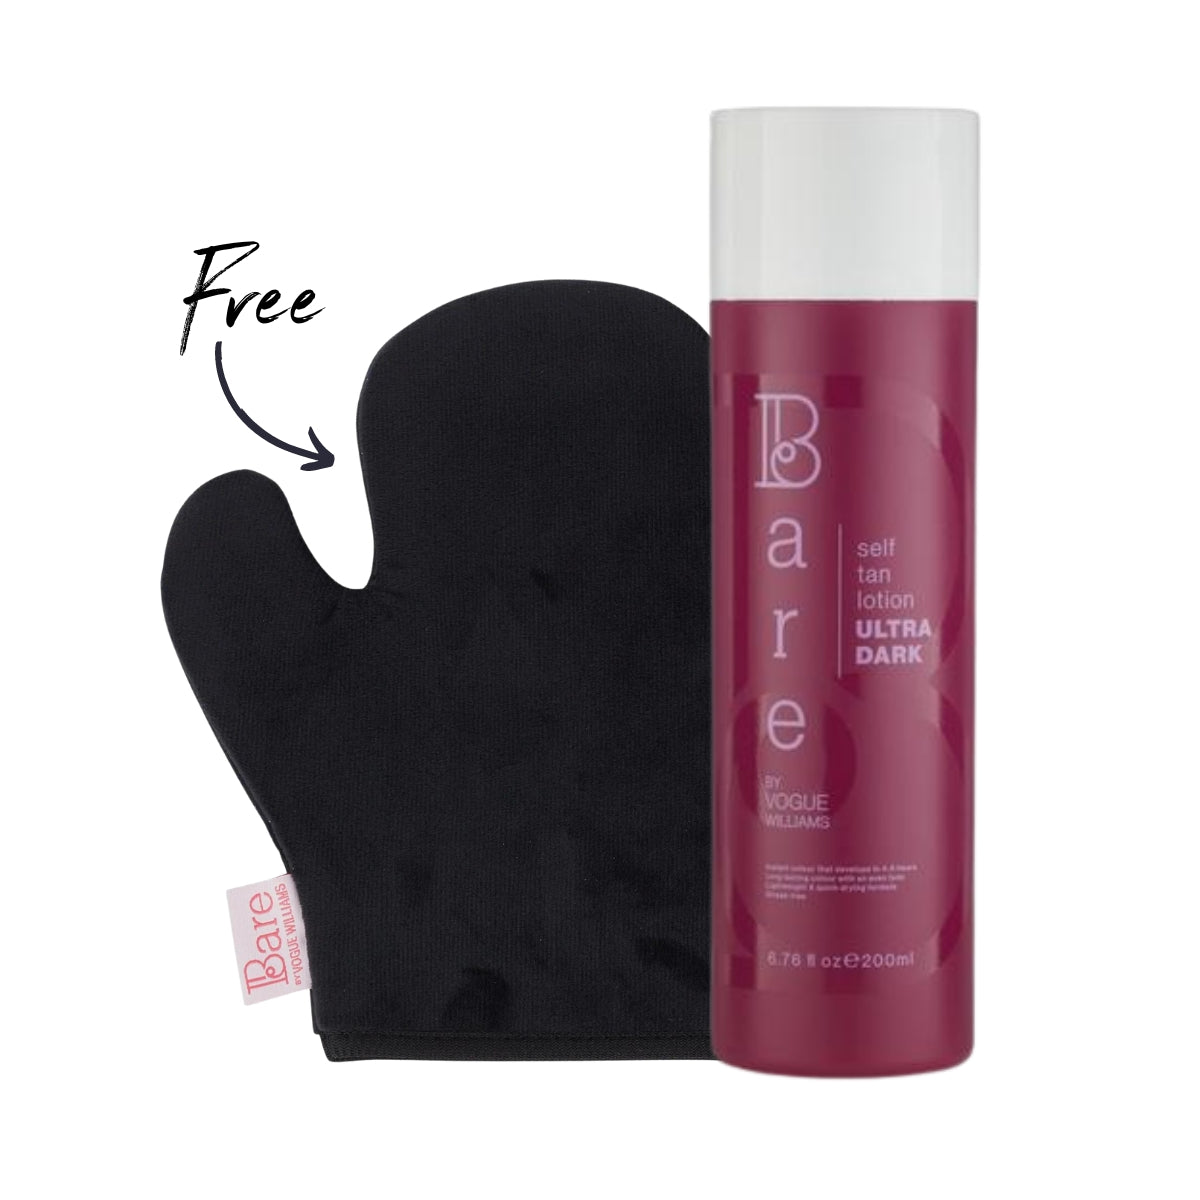 Bare By Vogue Self Tan Lotion Ultra Dark with free mitt